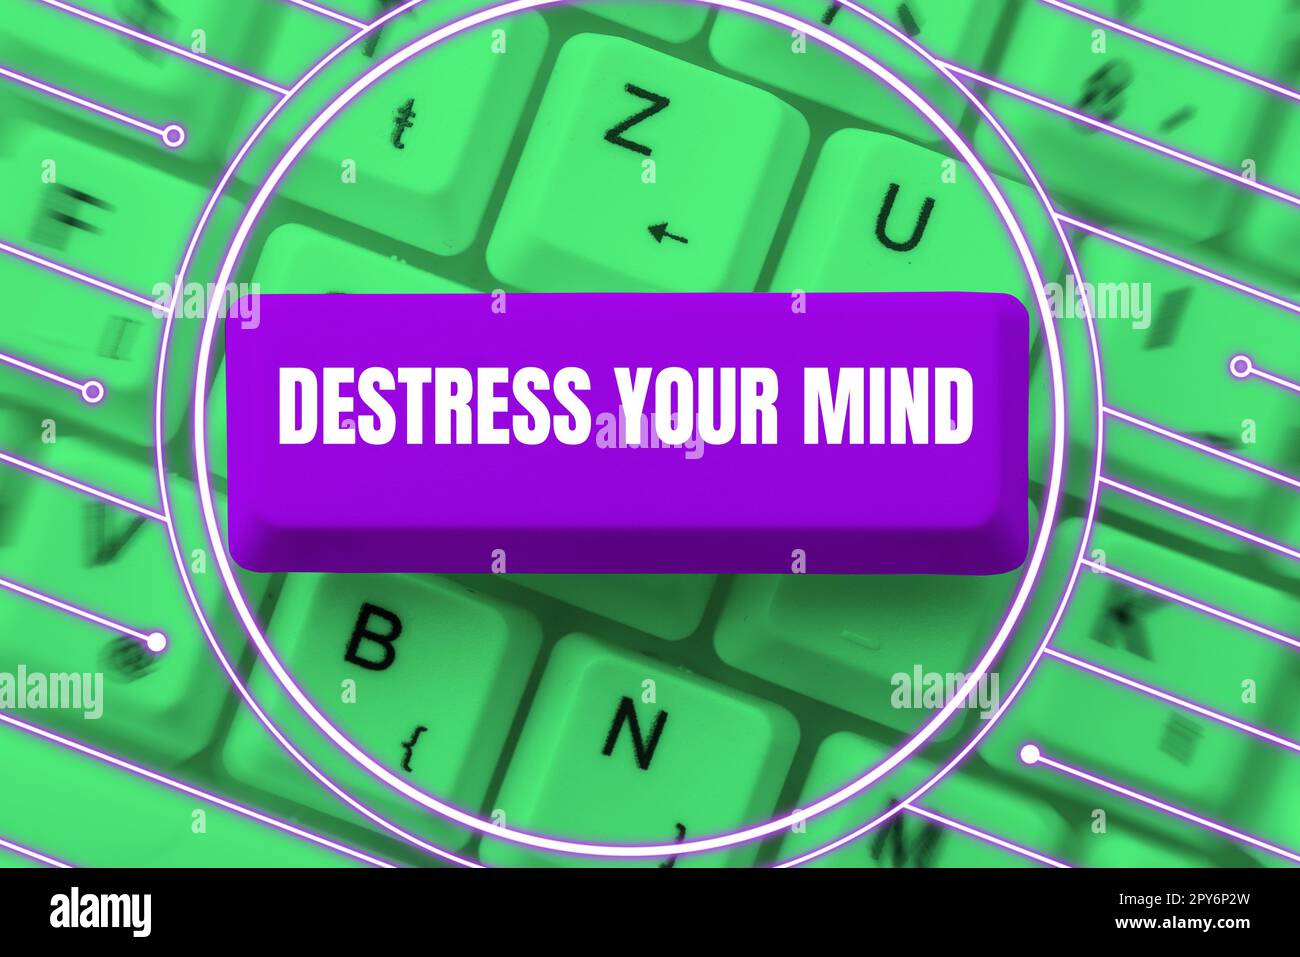 Hand writing sign Destress Your Mind. Business showcase to release mental tension, lessen stress Stock Photo